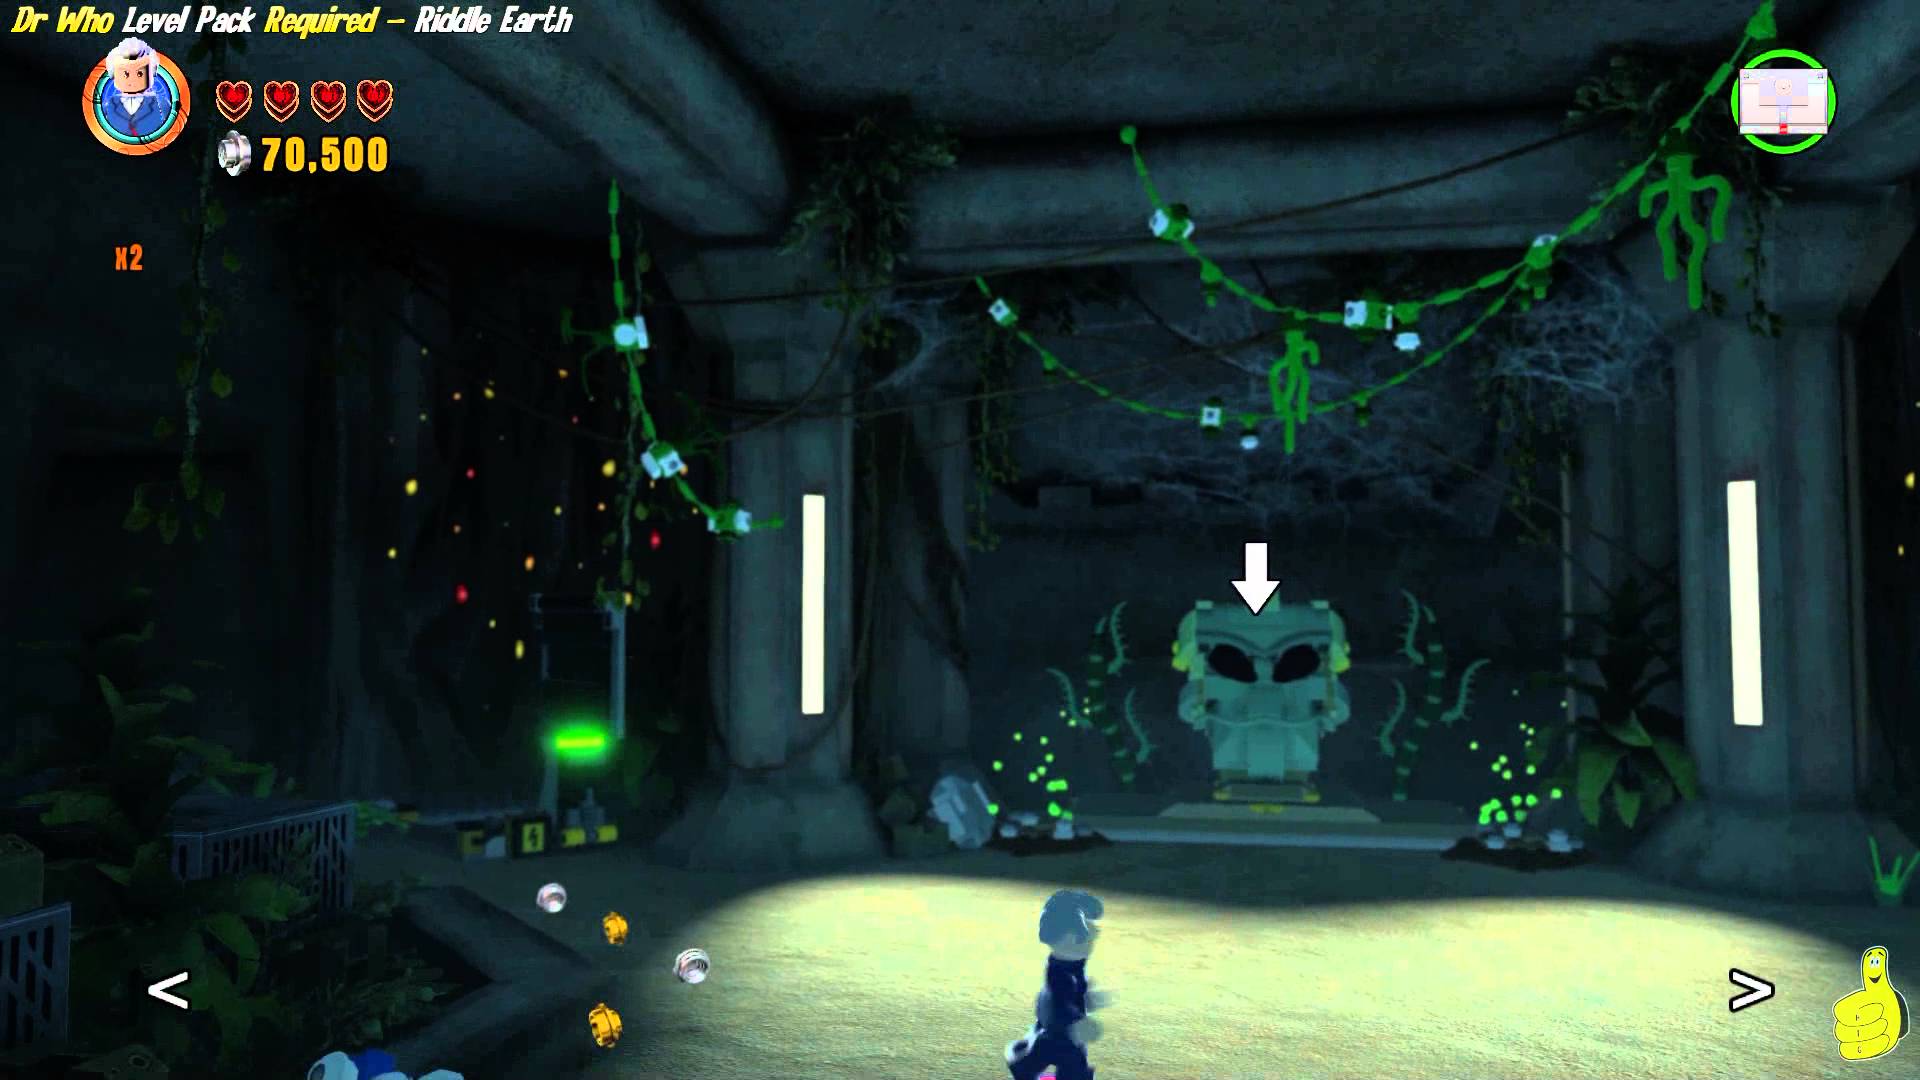 Lego Dimensions: The Silurian Ark (Doctor Who Easter Egg) – HTG